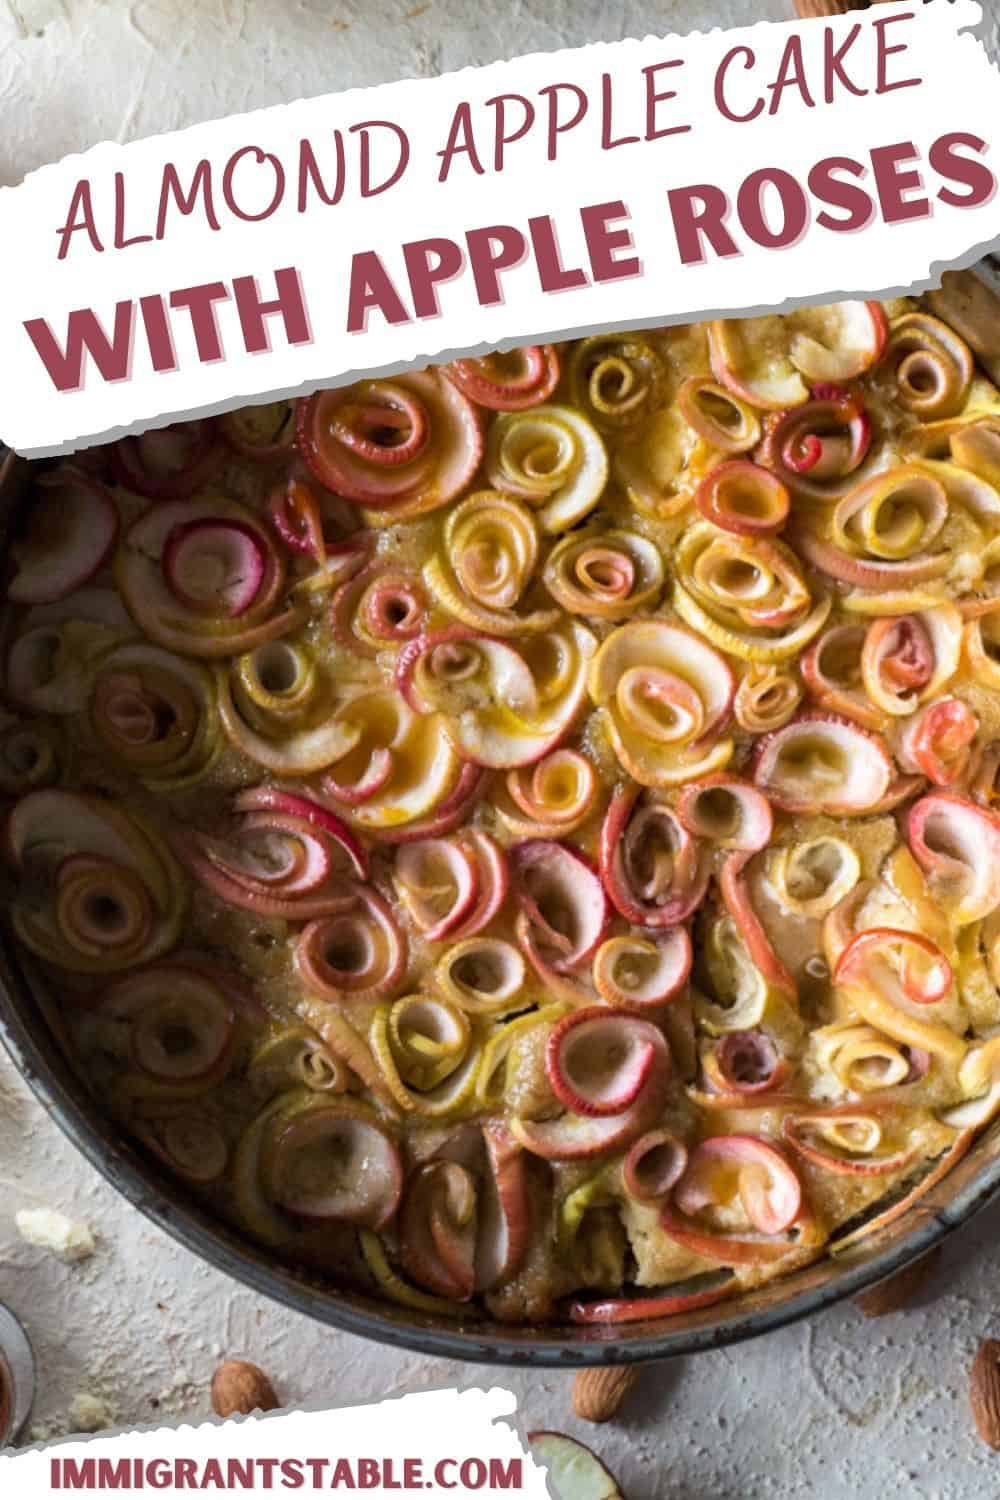 Almond apple cake with apple roses